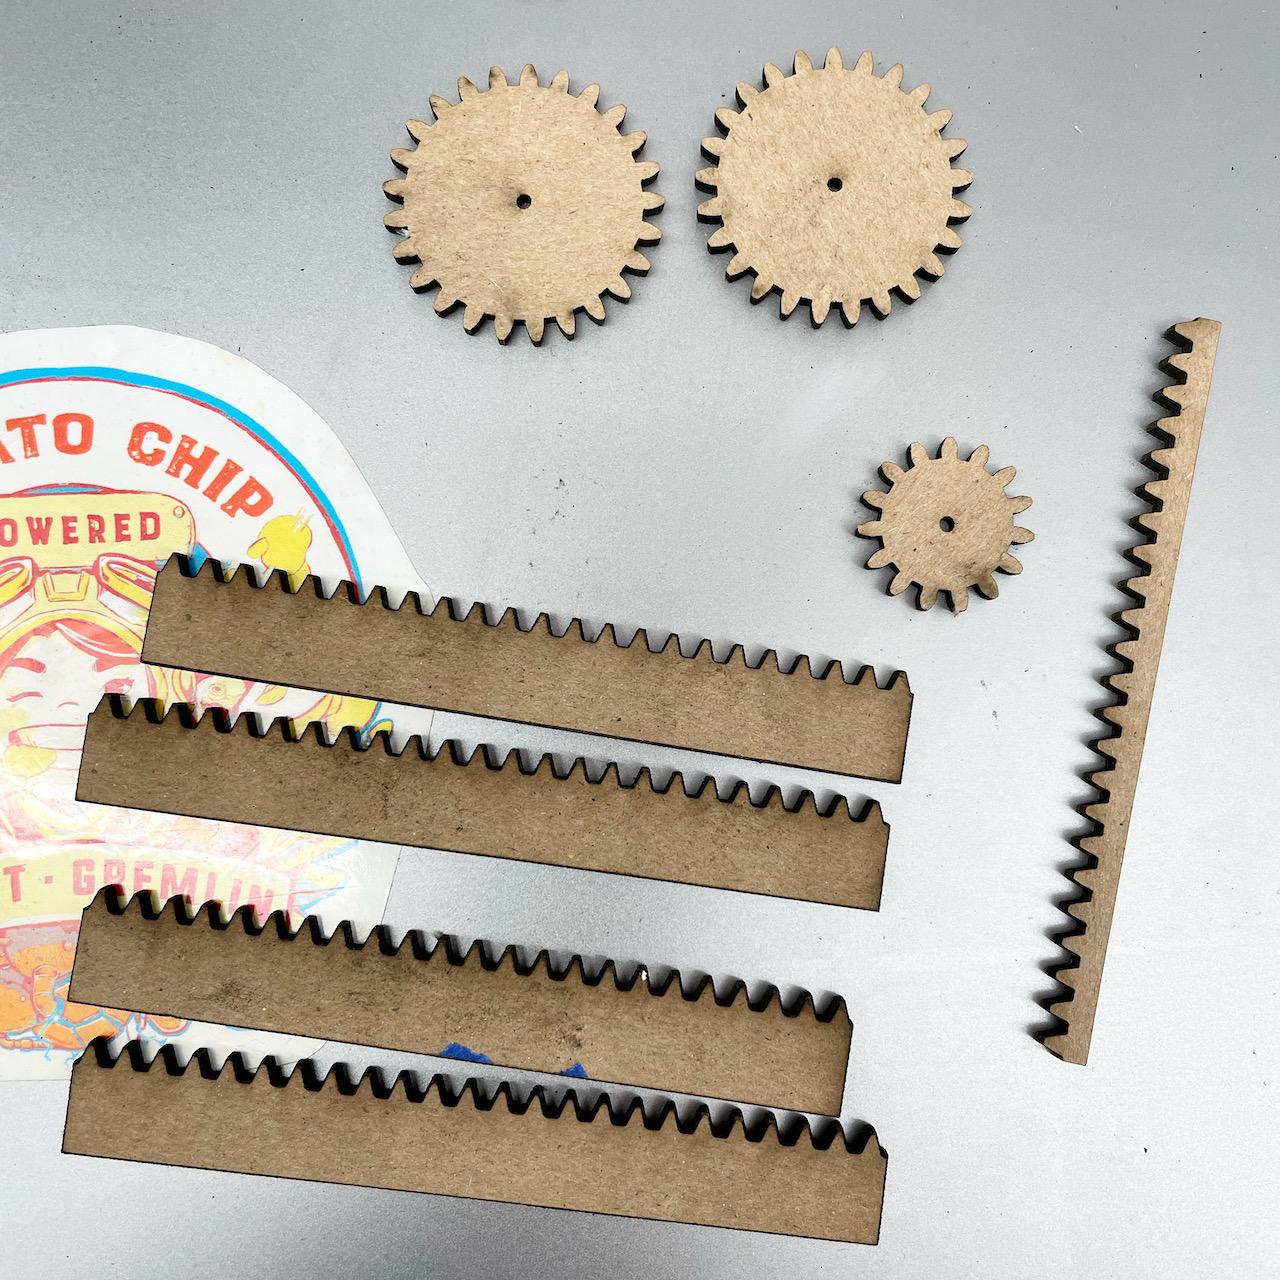 rack and pinion gears cut from matboard